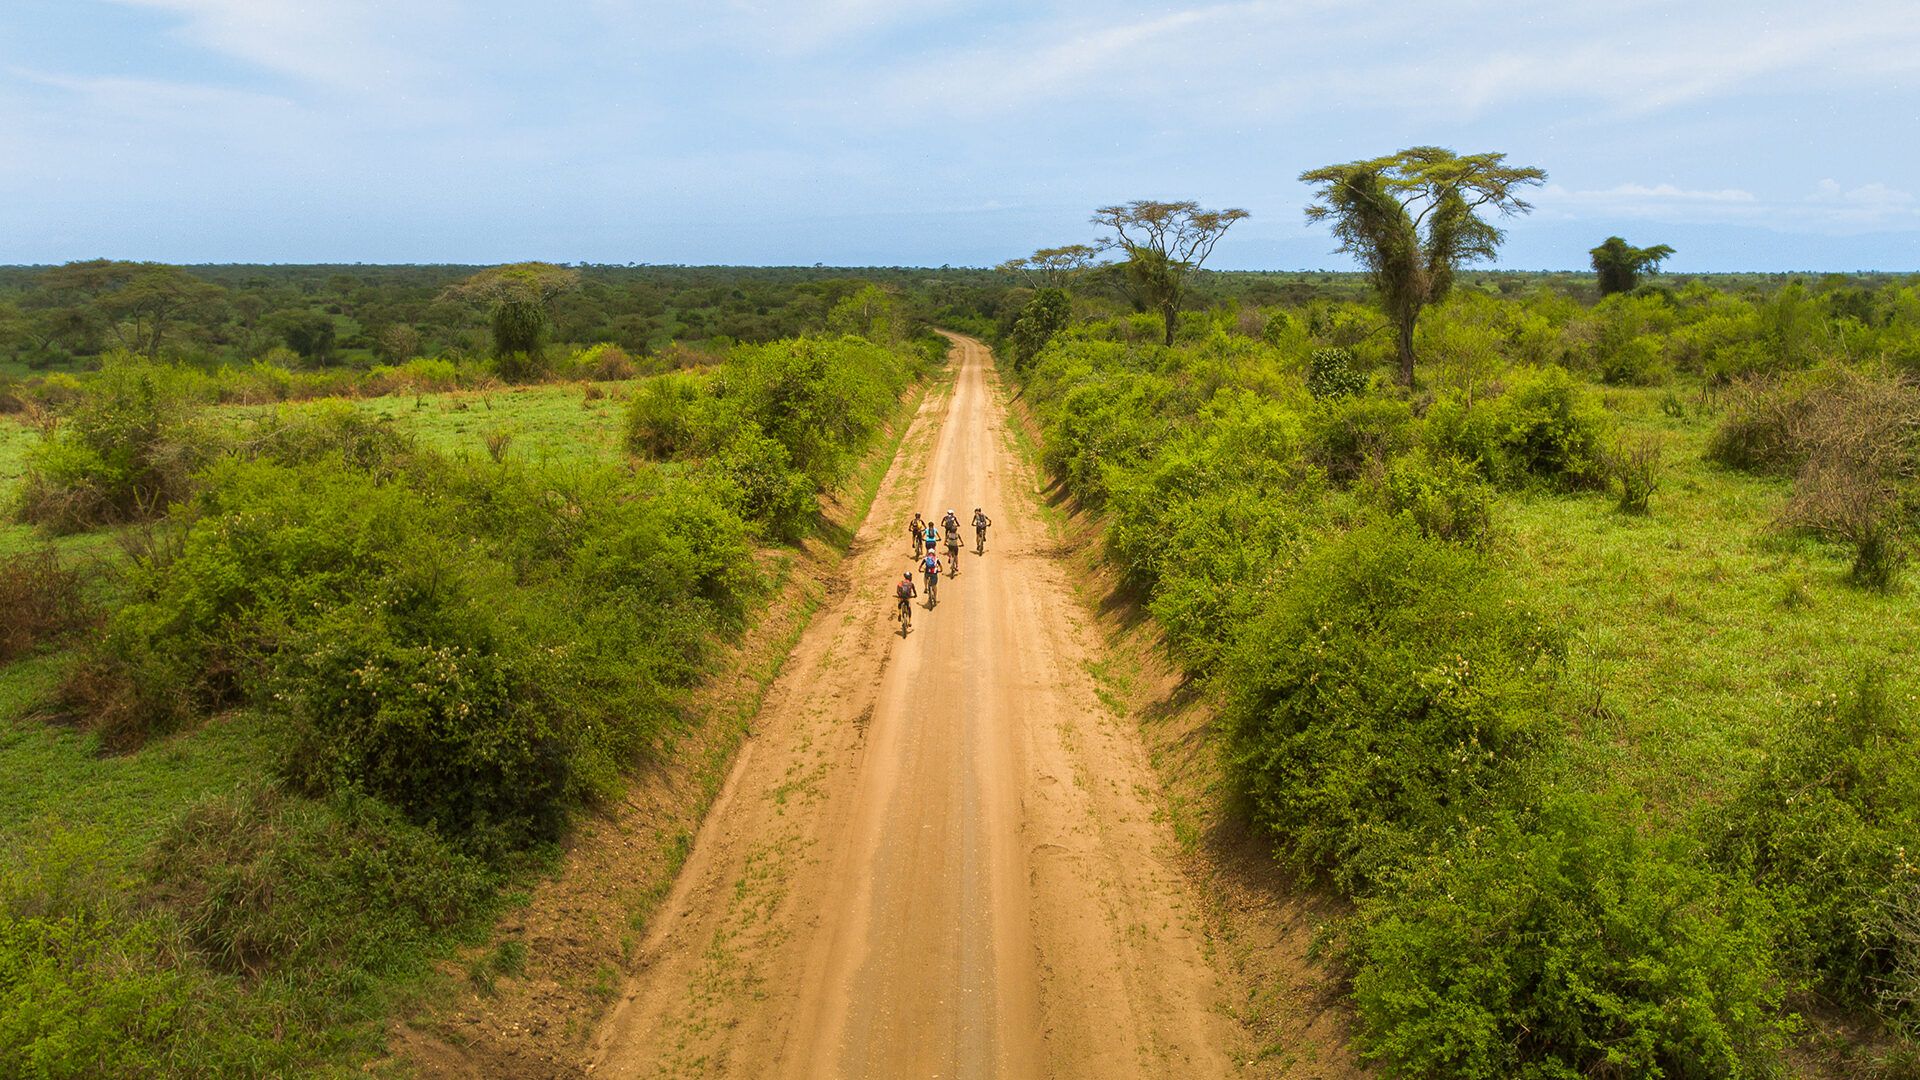 A group of cyclists head out into the savannah landscape near Lake Mburo, on the Uganda Cycling Trail. Photo: FatPigeon.cc